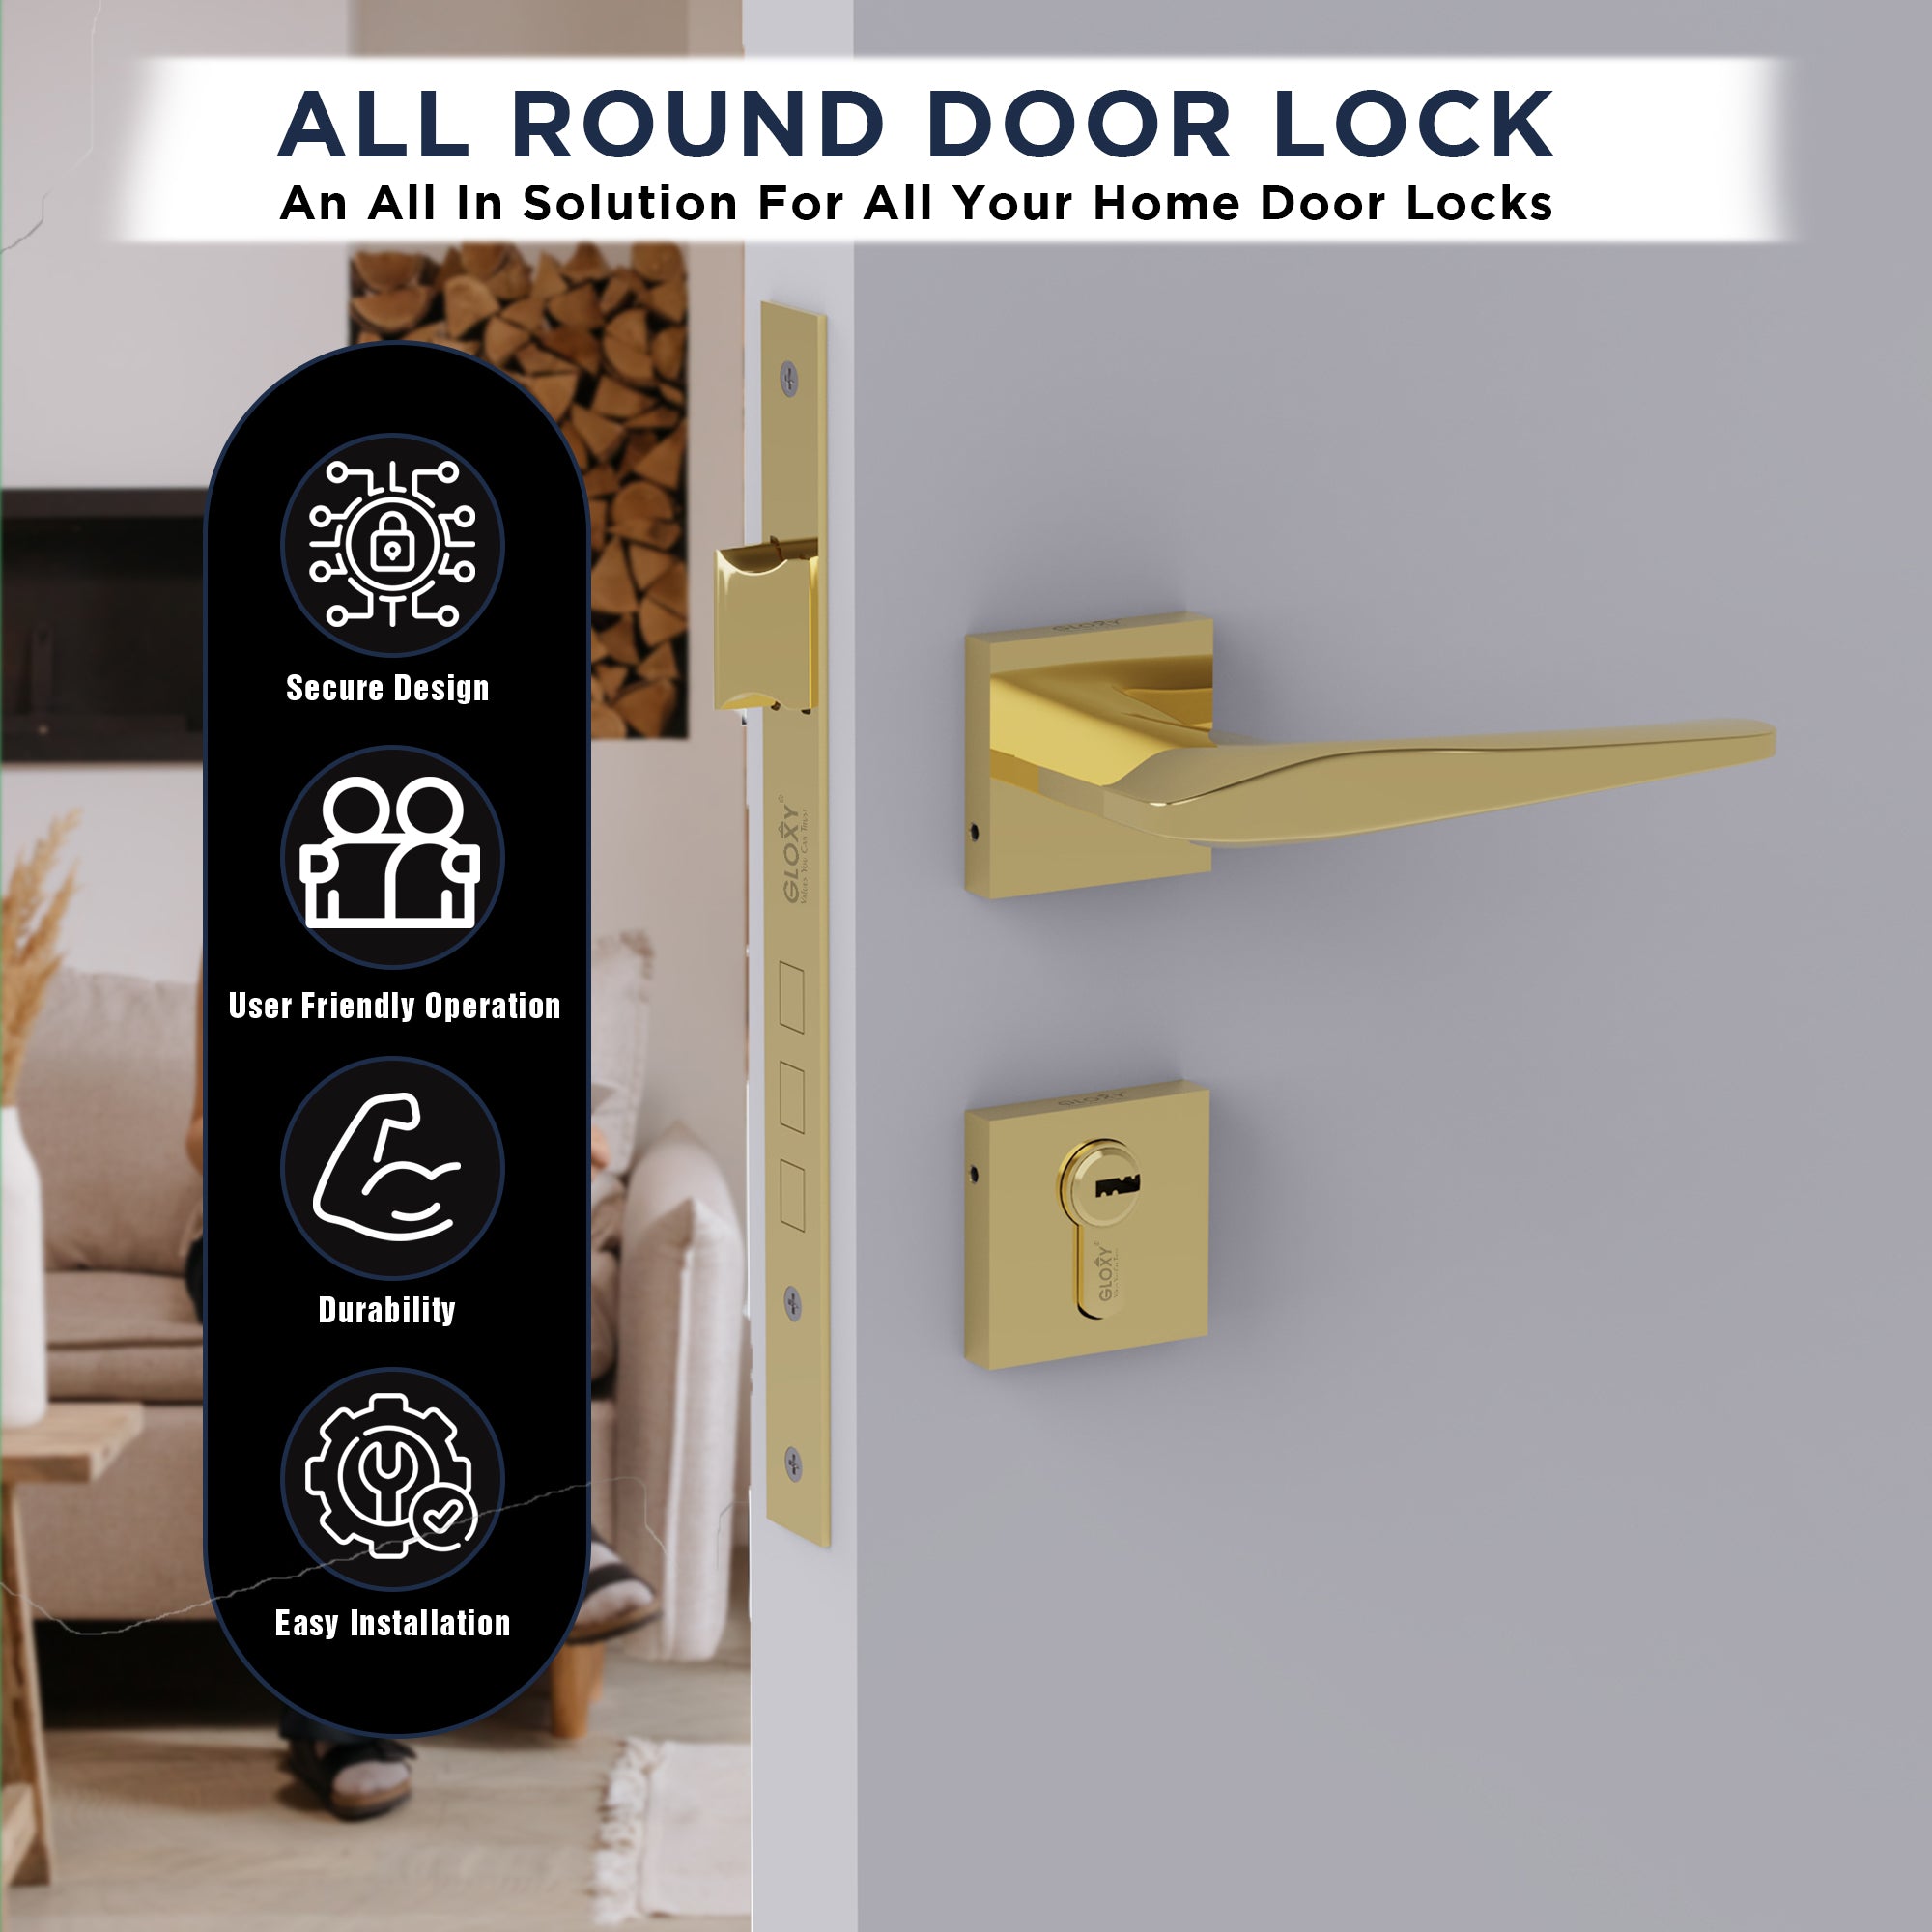 Premium Mortise Door Locks Handle Set with Brass Lock Body for Home, Office, Hotel -by GLOXY®